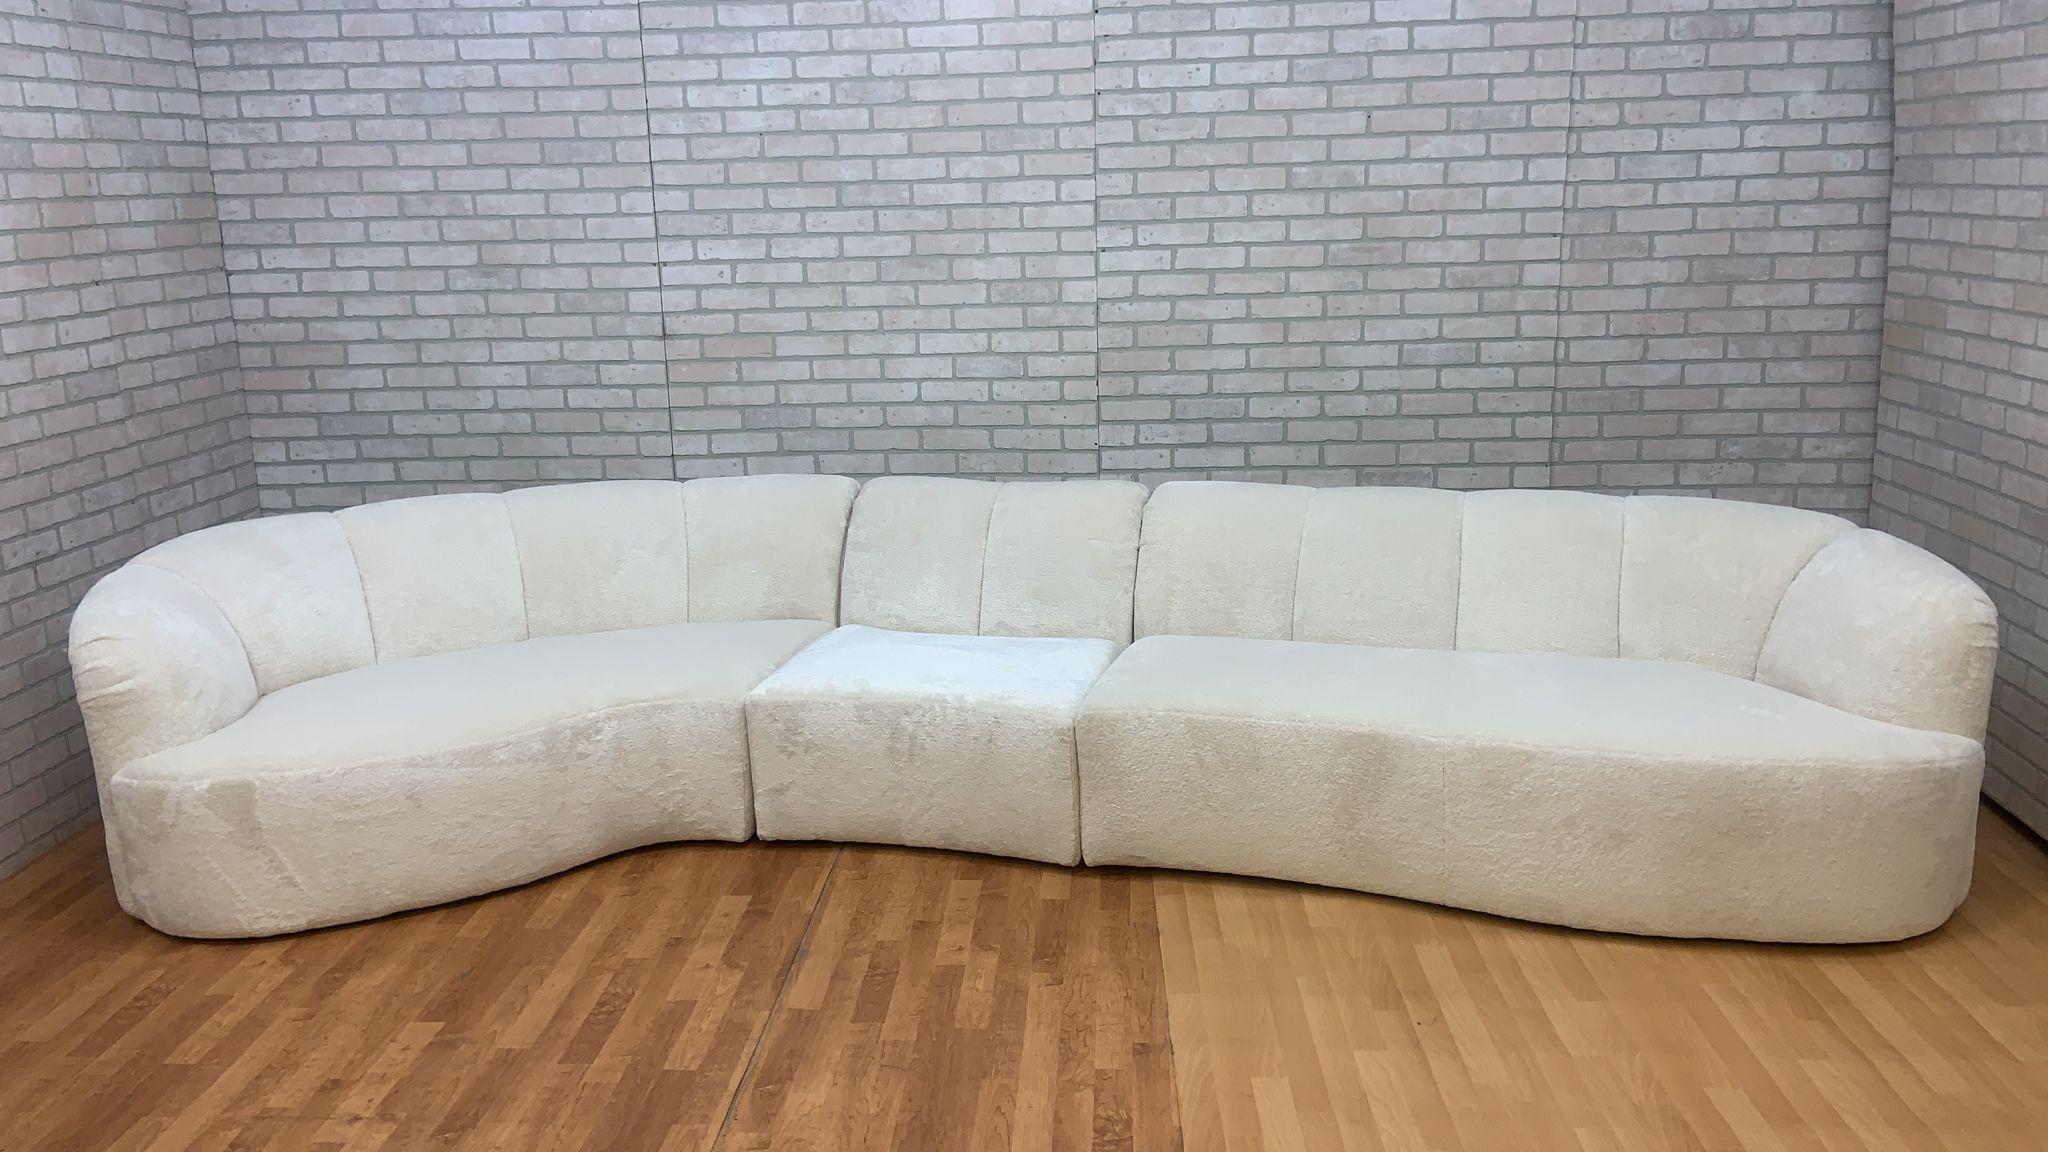 Mid-Century Modern Curved Channel Back Serpentine Sectional Sofa Newly Upholstered in Beautiful Natural Alpaca Wool

Stunning vintage Mid-Century Modern curved serpentine 4 piece sectional Sofa. The sofa has been newly upholstered in a beautiful